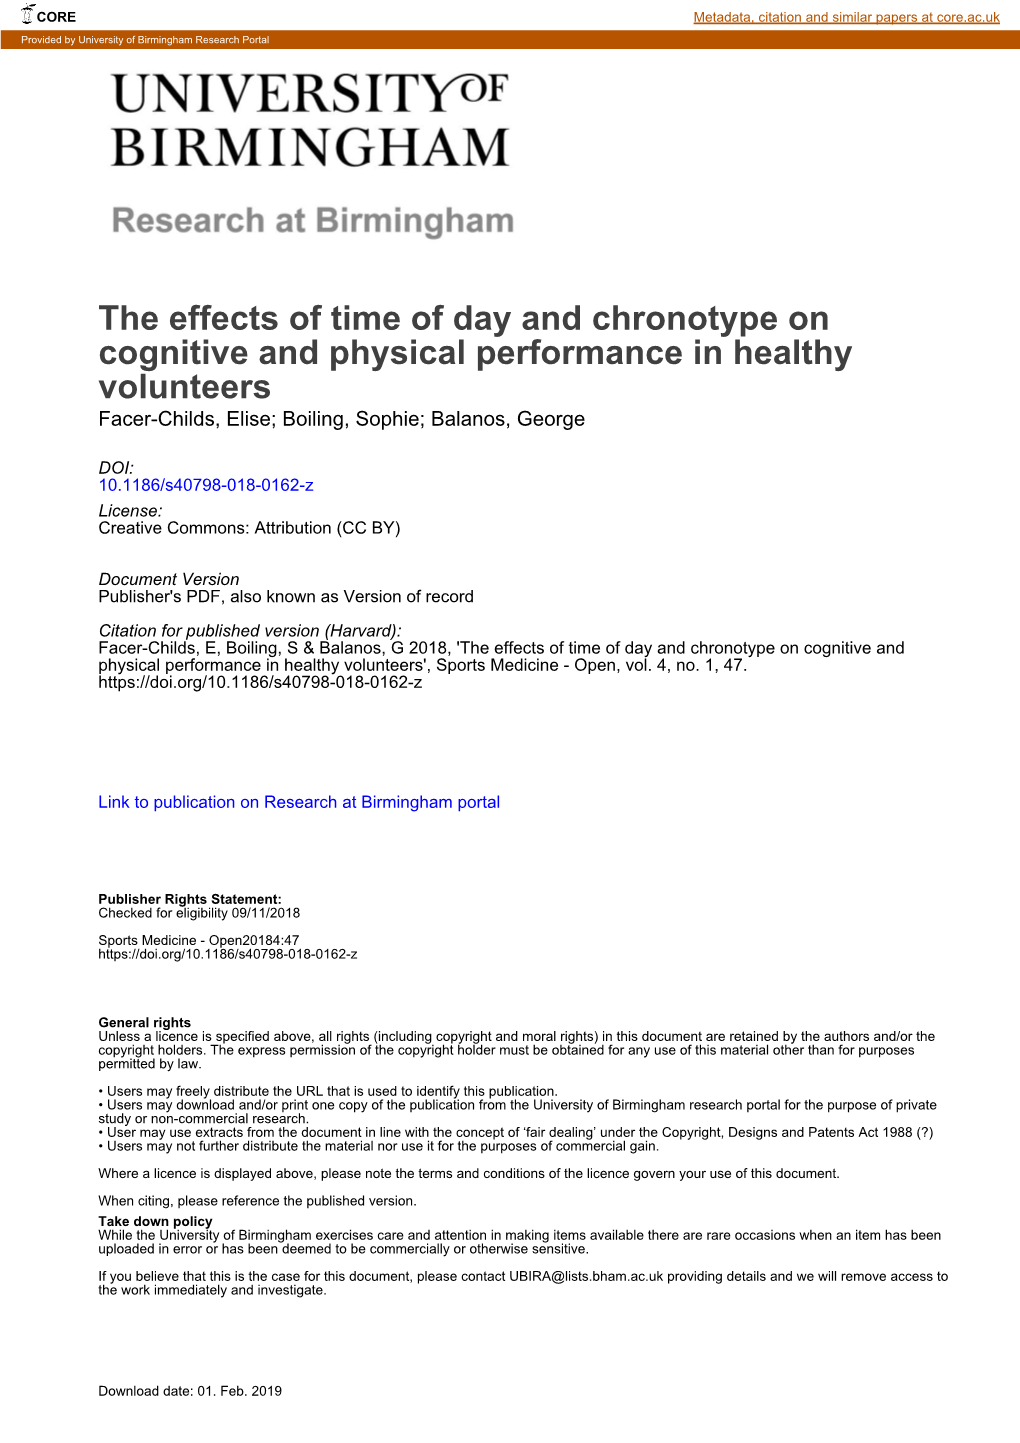 The Effects of Time of Day and Chronotype on Cognitive and Physical Performance in Healthy Volunteers Facer-Childs, Elise; Boiling, Sophie; Balanos, George